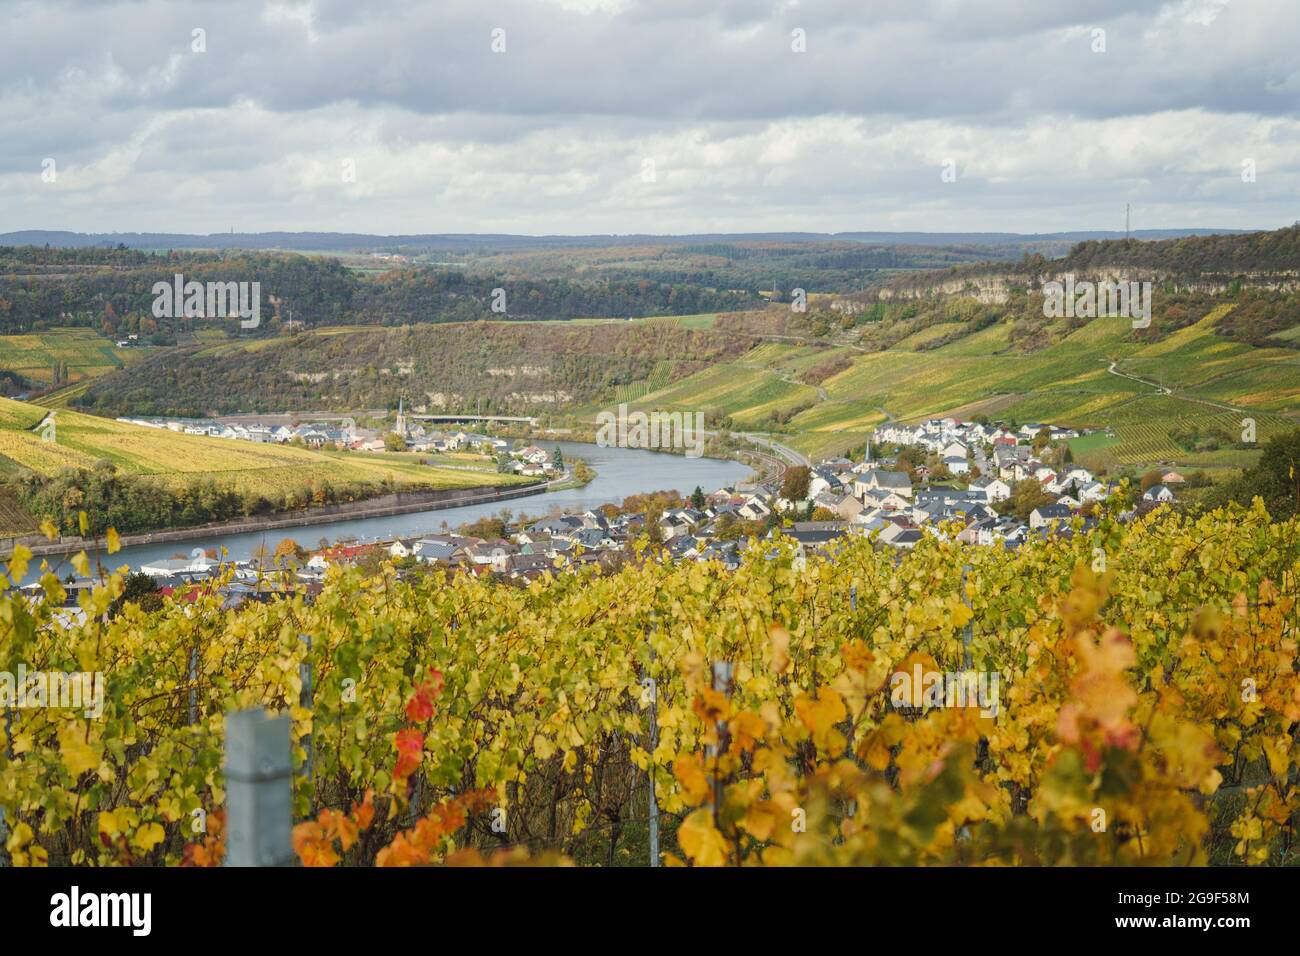 View of Nittel, Germany, and the Moselle River on a cloudy day Stock Photo  - Alamy